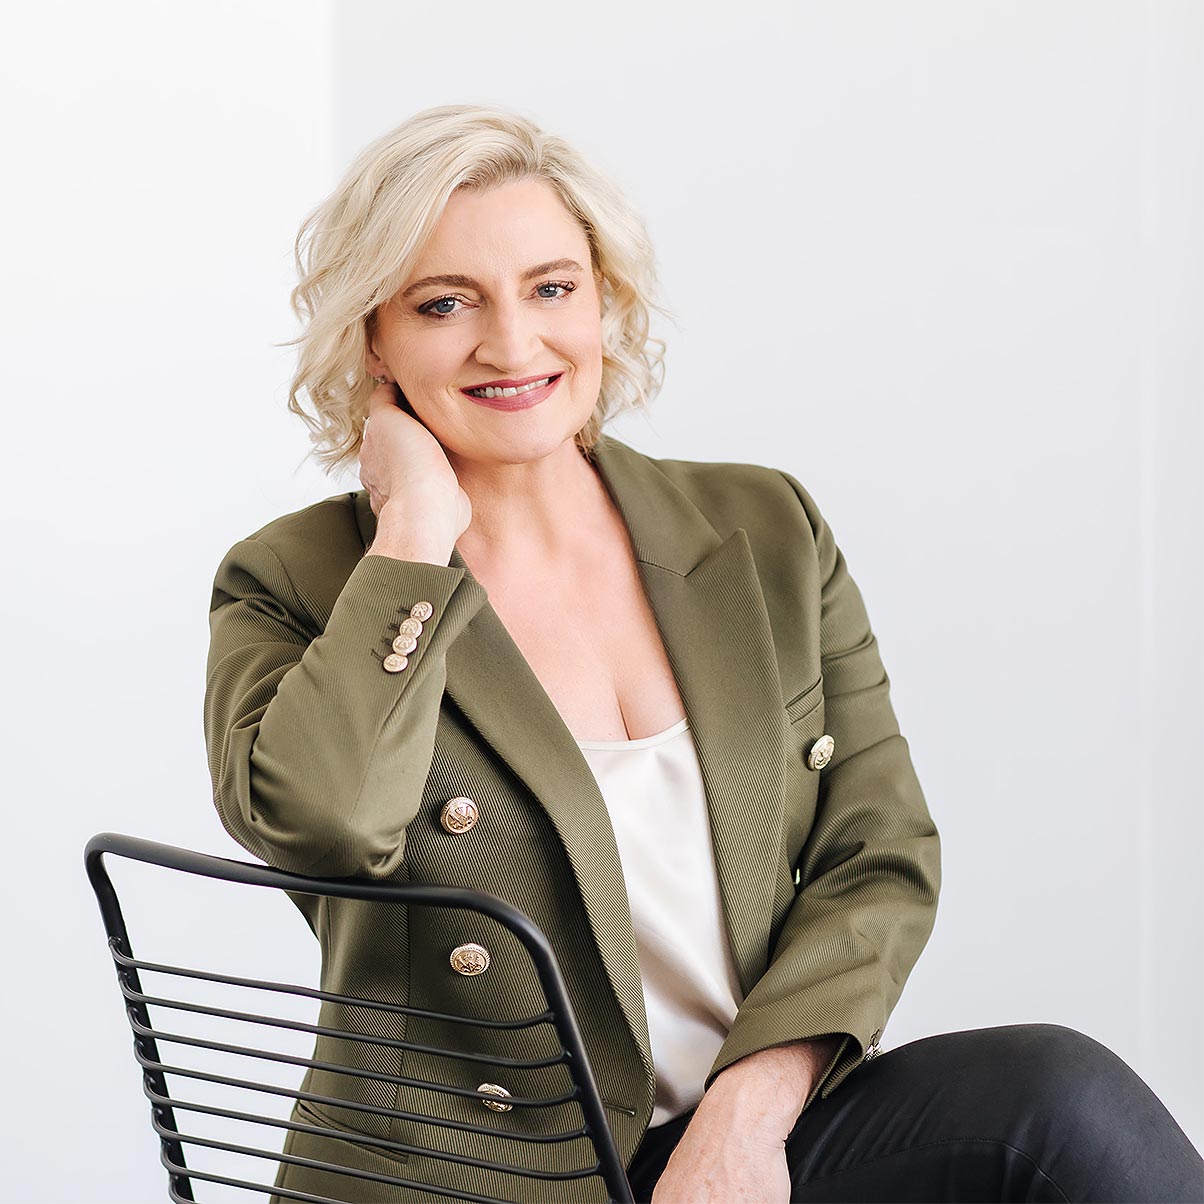 julie-hyde-making-it-count-busy-leadership-leader-leaders-keynote-mindset-speaker-mentor-business-empower-lead-empowering-podcast-great-intentional-authentic-mentor-coach-role-model-top-best-inspire-engage-practical-insightful-boost-performance-tips-how-to-strategy-powerful-change-mindset-thrive-results-corporate-future-smart-program-mentorship-career-next-level-step-reconnect-control-proactive-agile-adaptable-one-on-one-woman-lady-boss-female-sydney-australia-speaker-host-guide-guidance-business-ceo-management